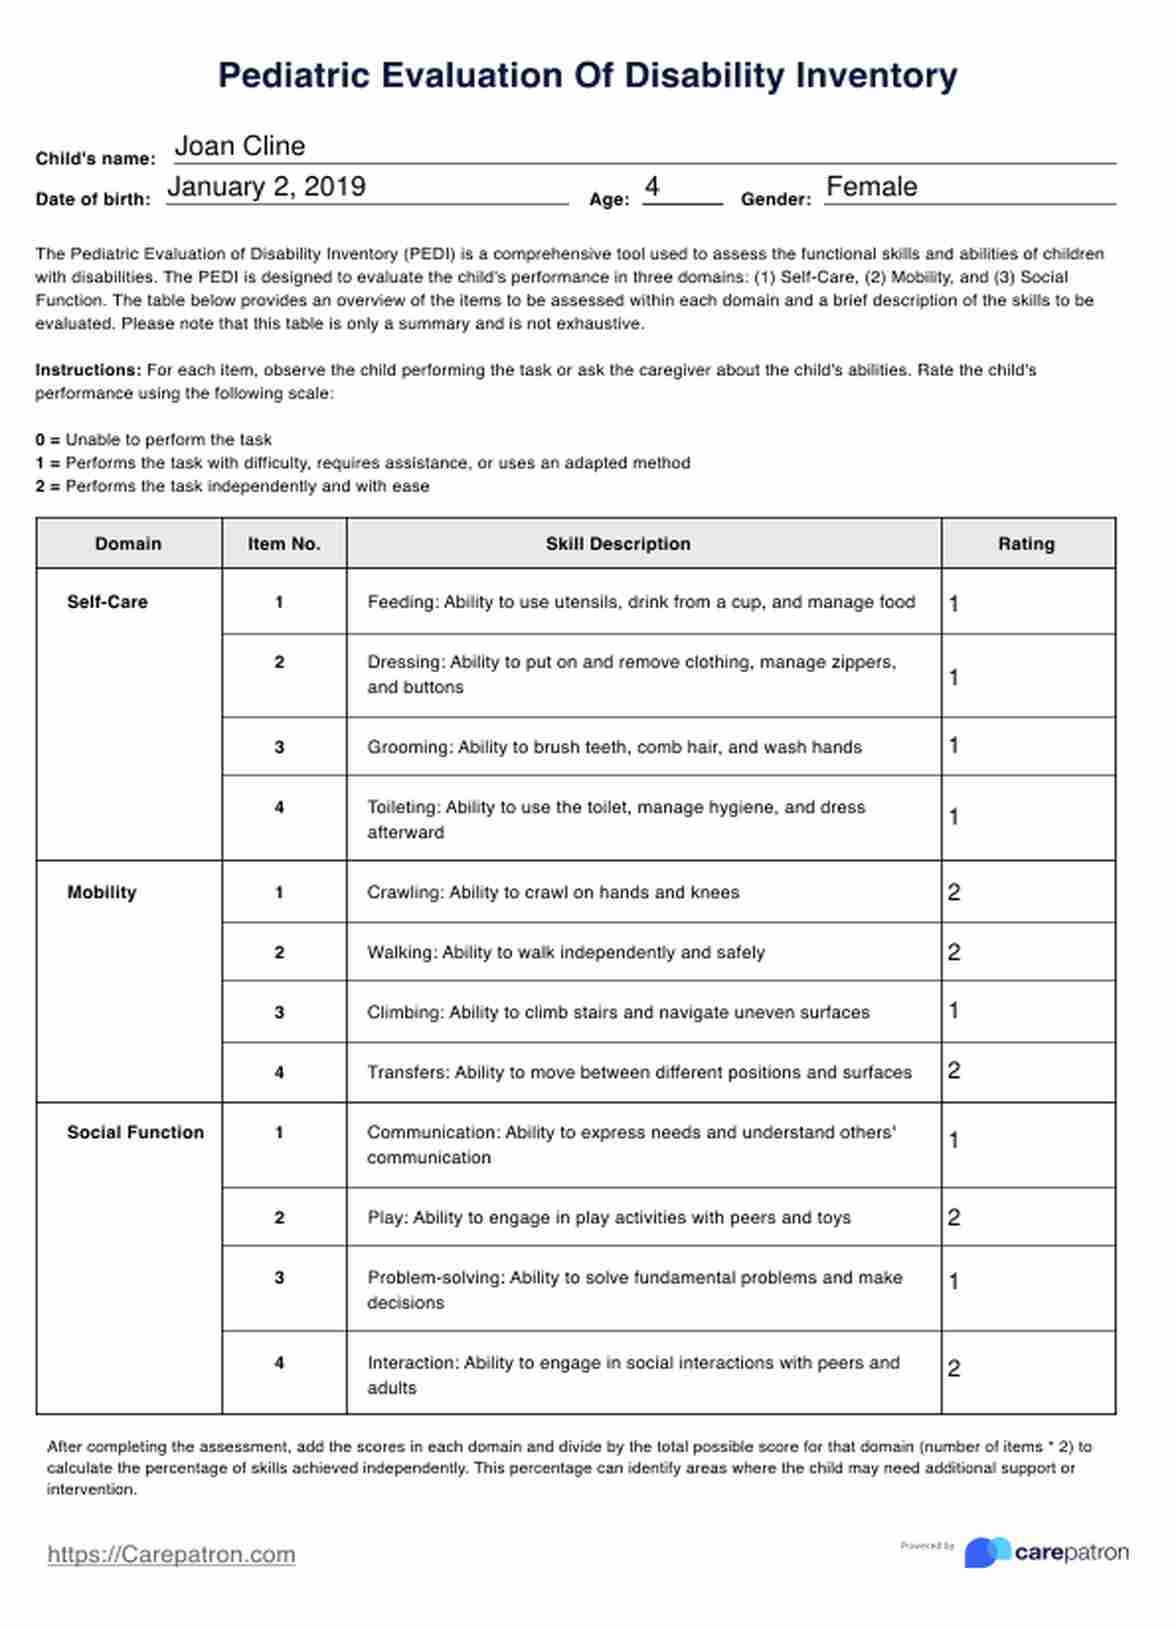 Pediatric Evaluation Of Disability Inventory PDF Example